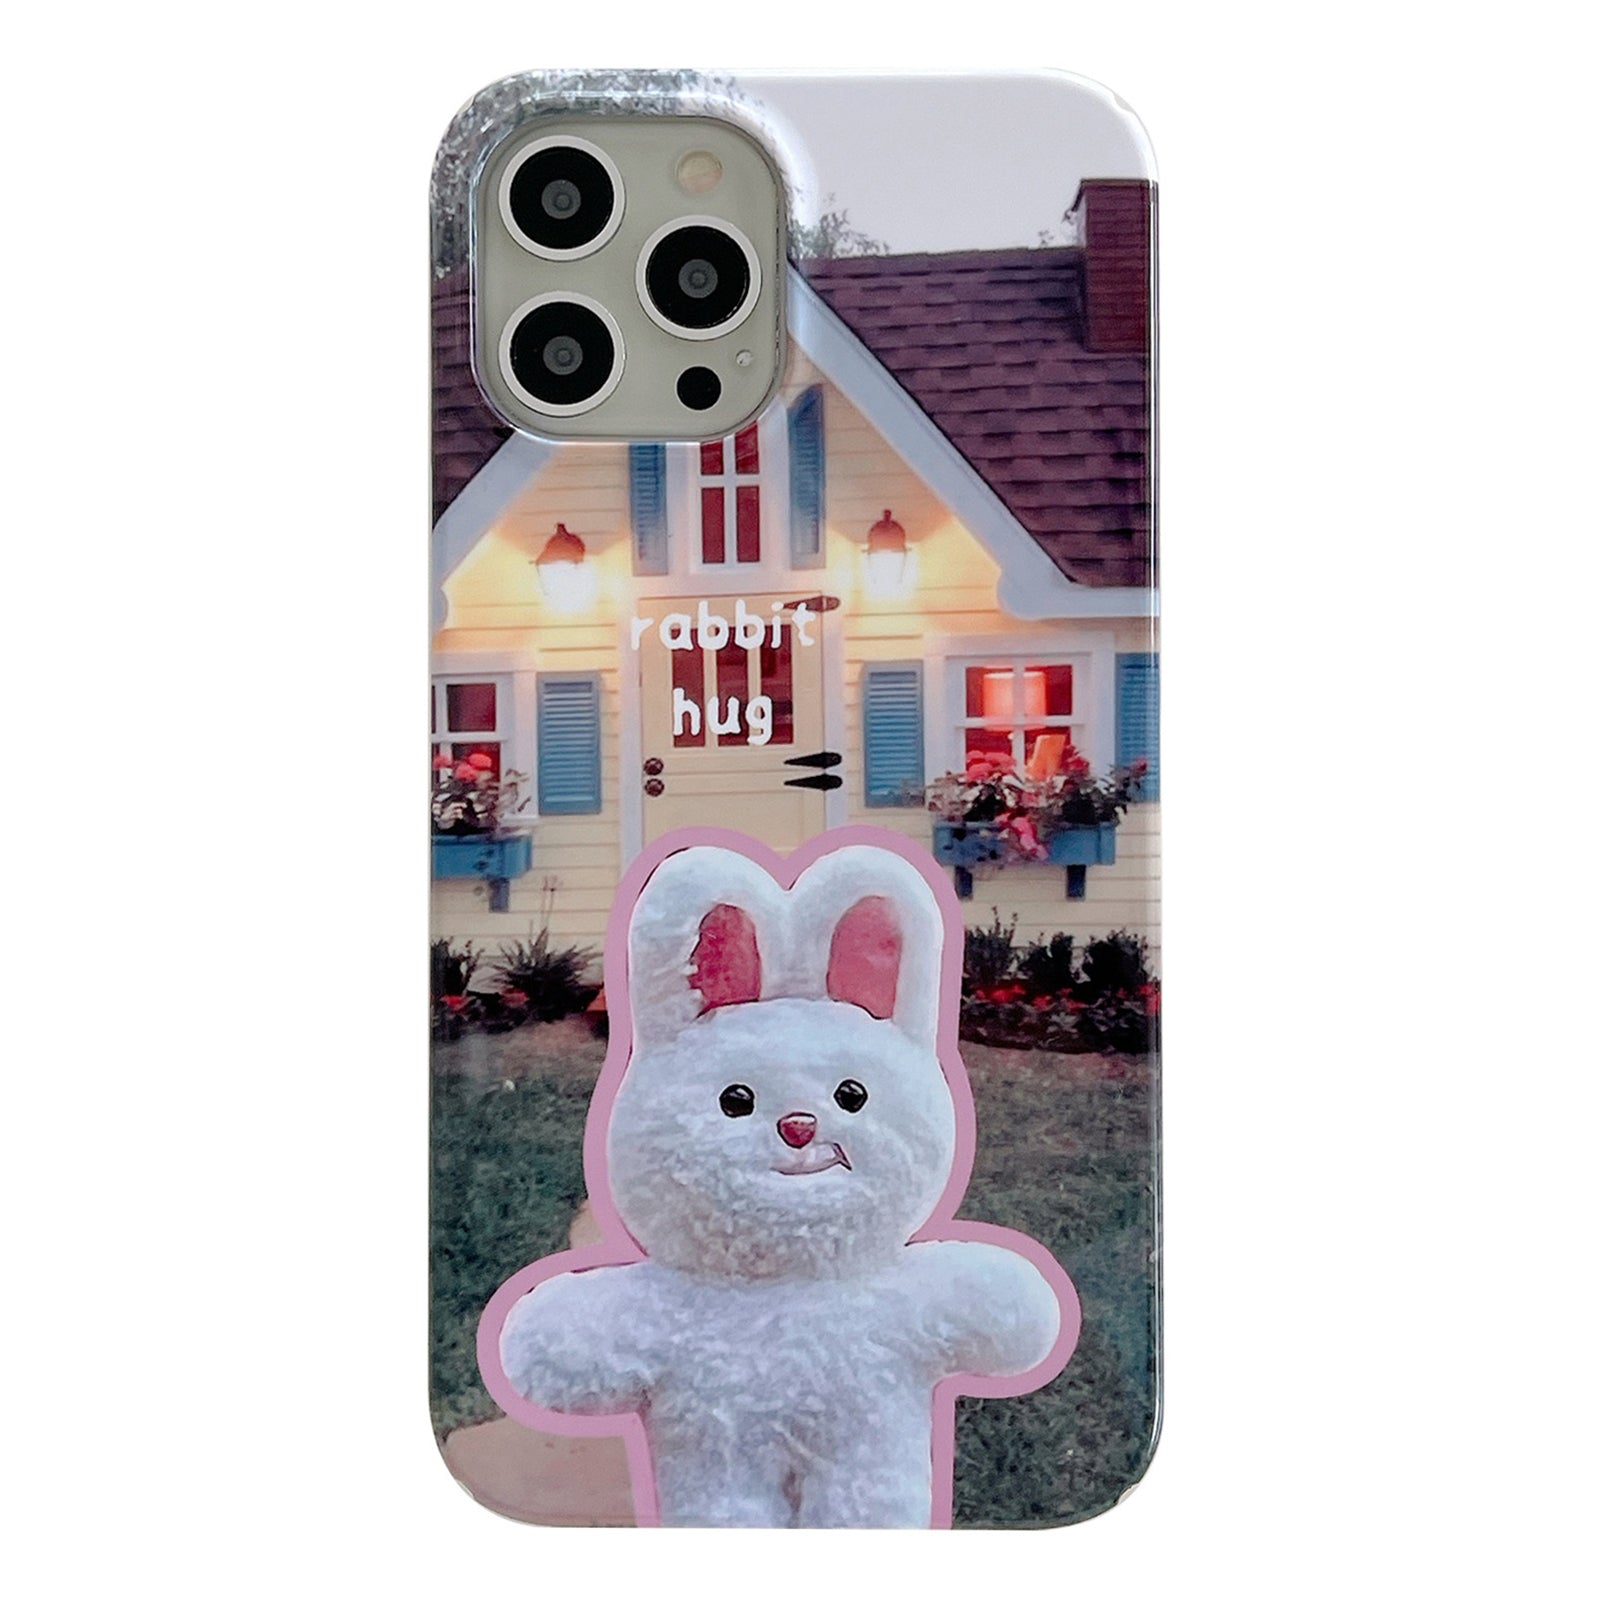 Hard PC Phone Cover for iPhone 12 Pro 6.1 inch Pattern Printing Anti-Drop Glossy Phone Case - Rabbit Hug